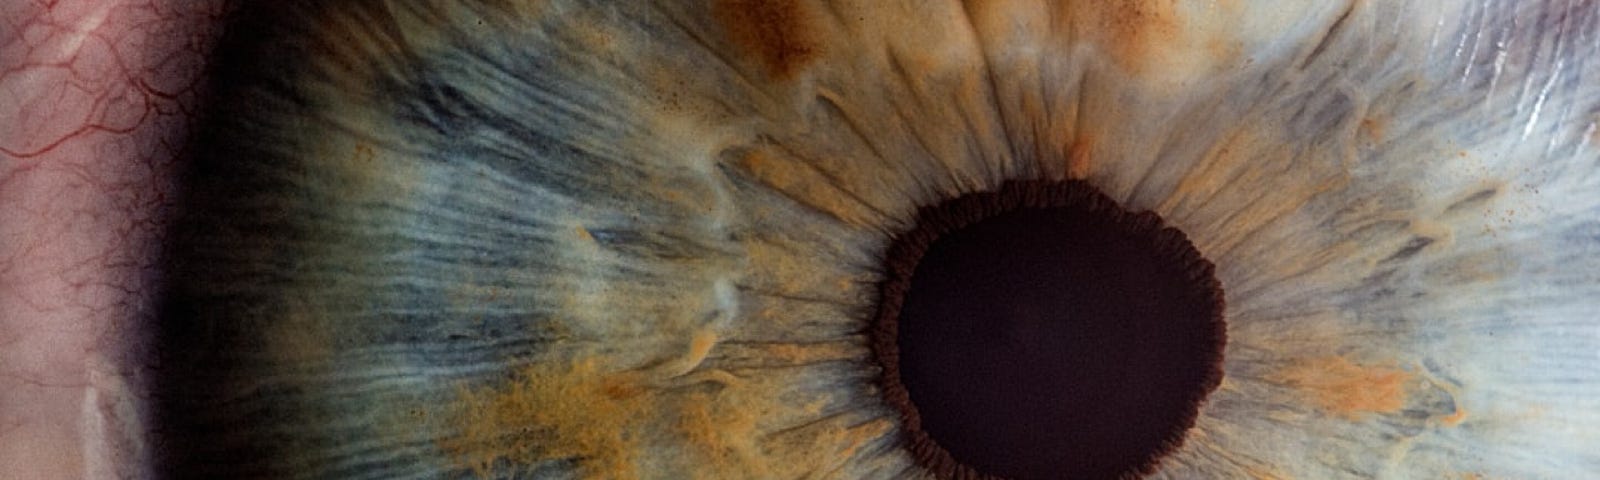 Super close up of a iris and retina of the human eye, that is blue and gold flecked in color.